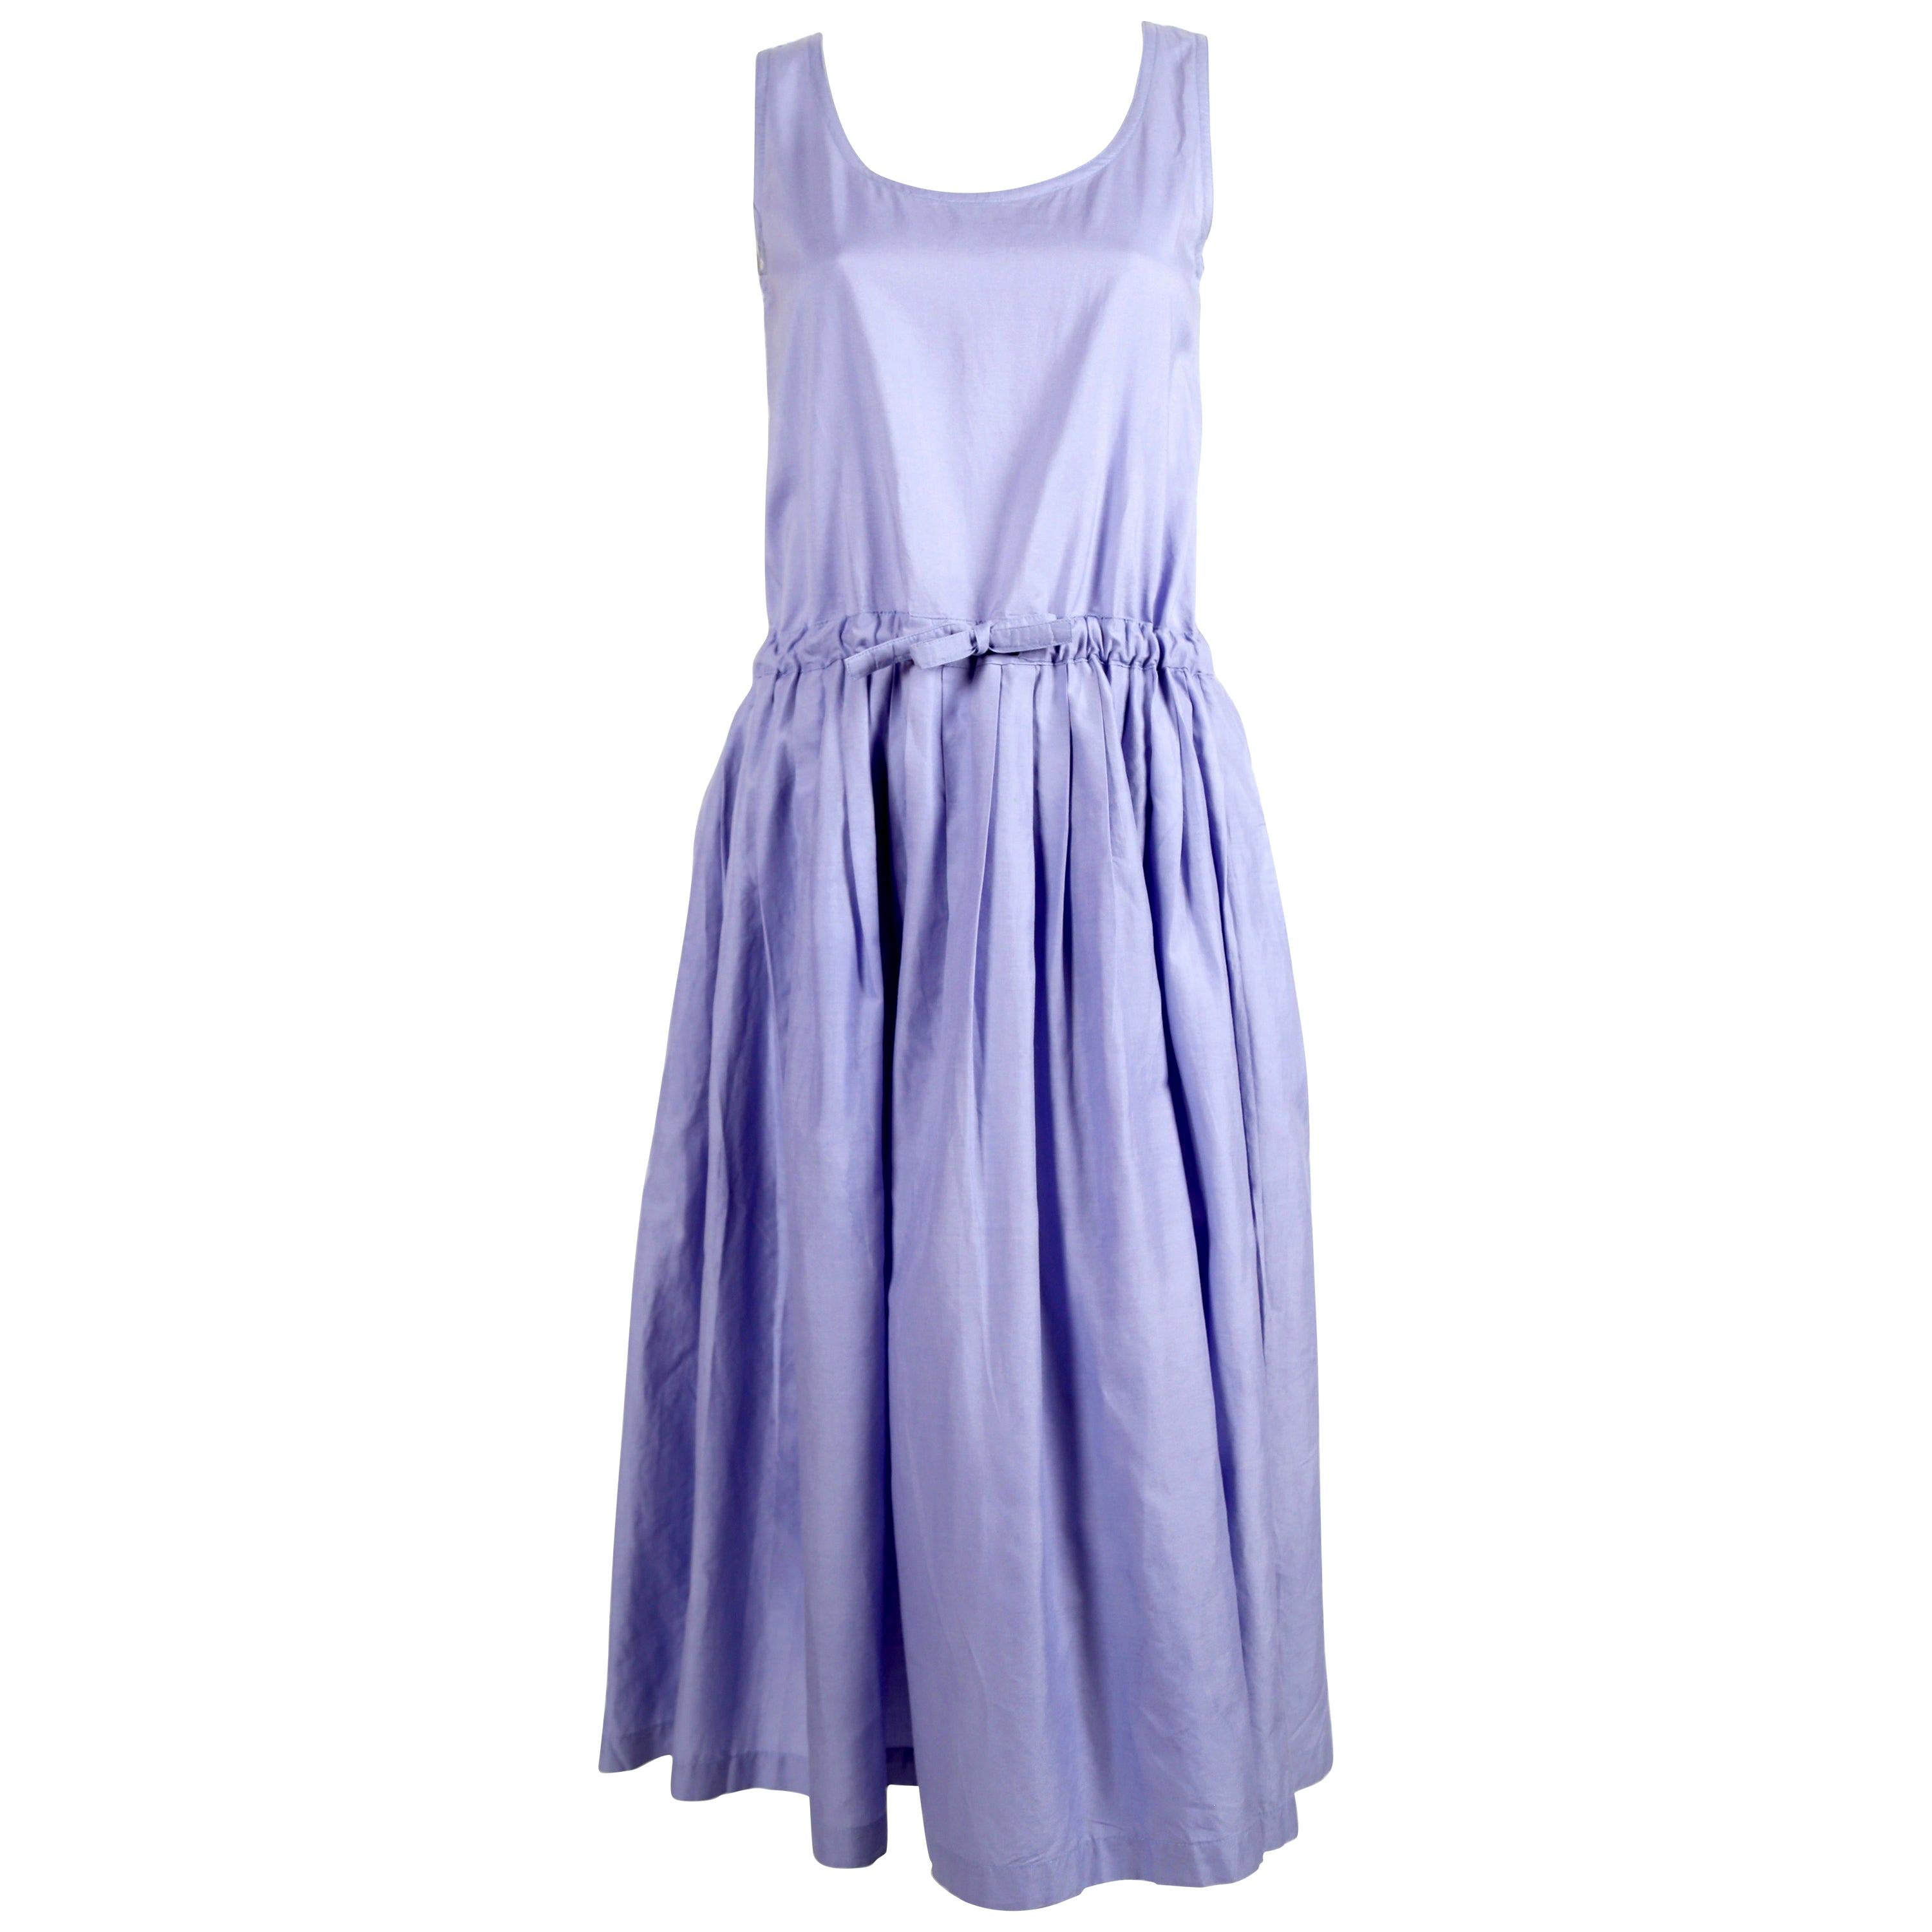 early 1980's ISSEY MIYAKE periwinkle blue cotton day dress with pleats